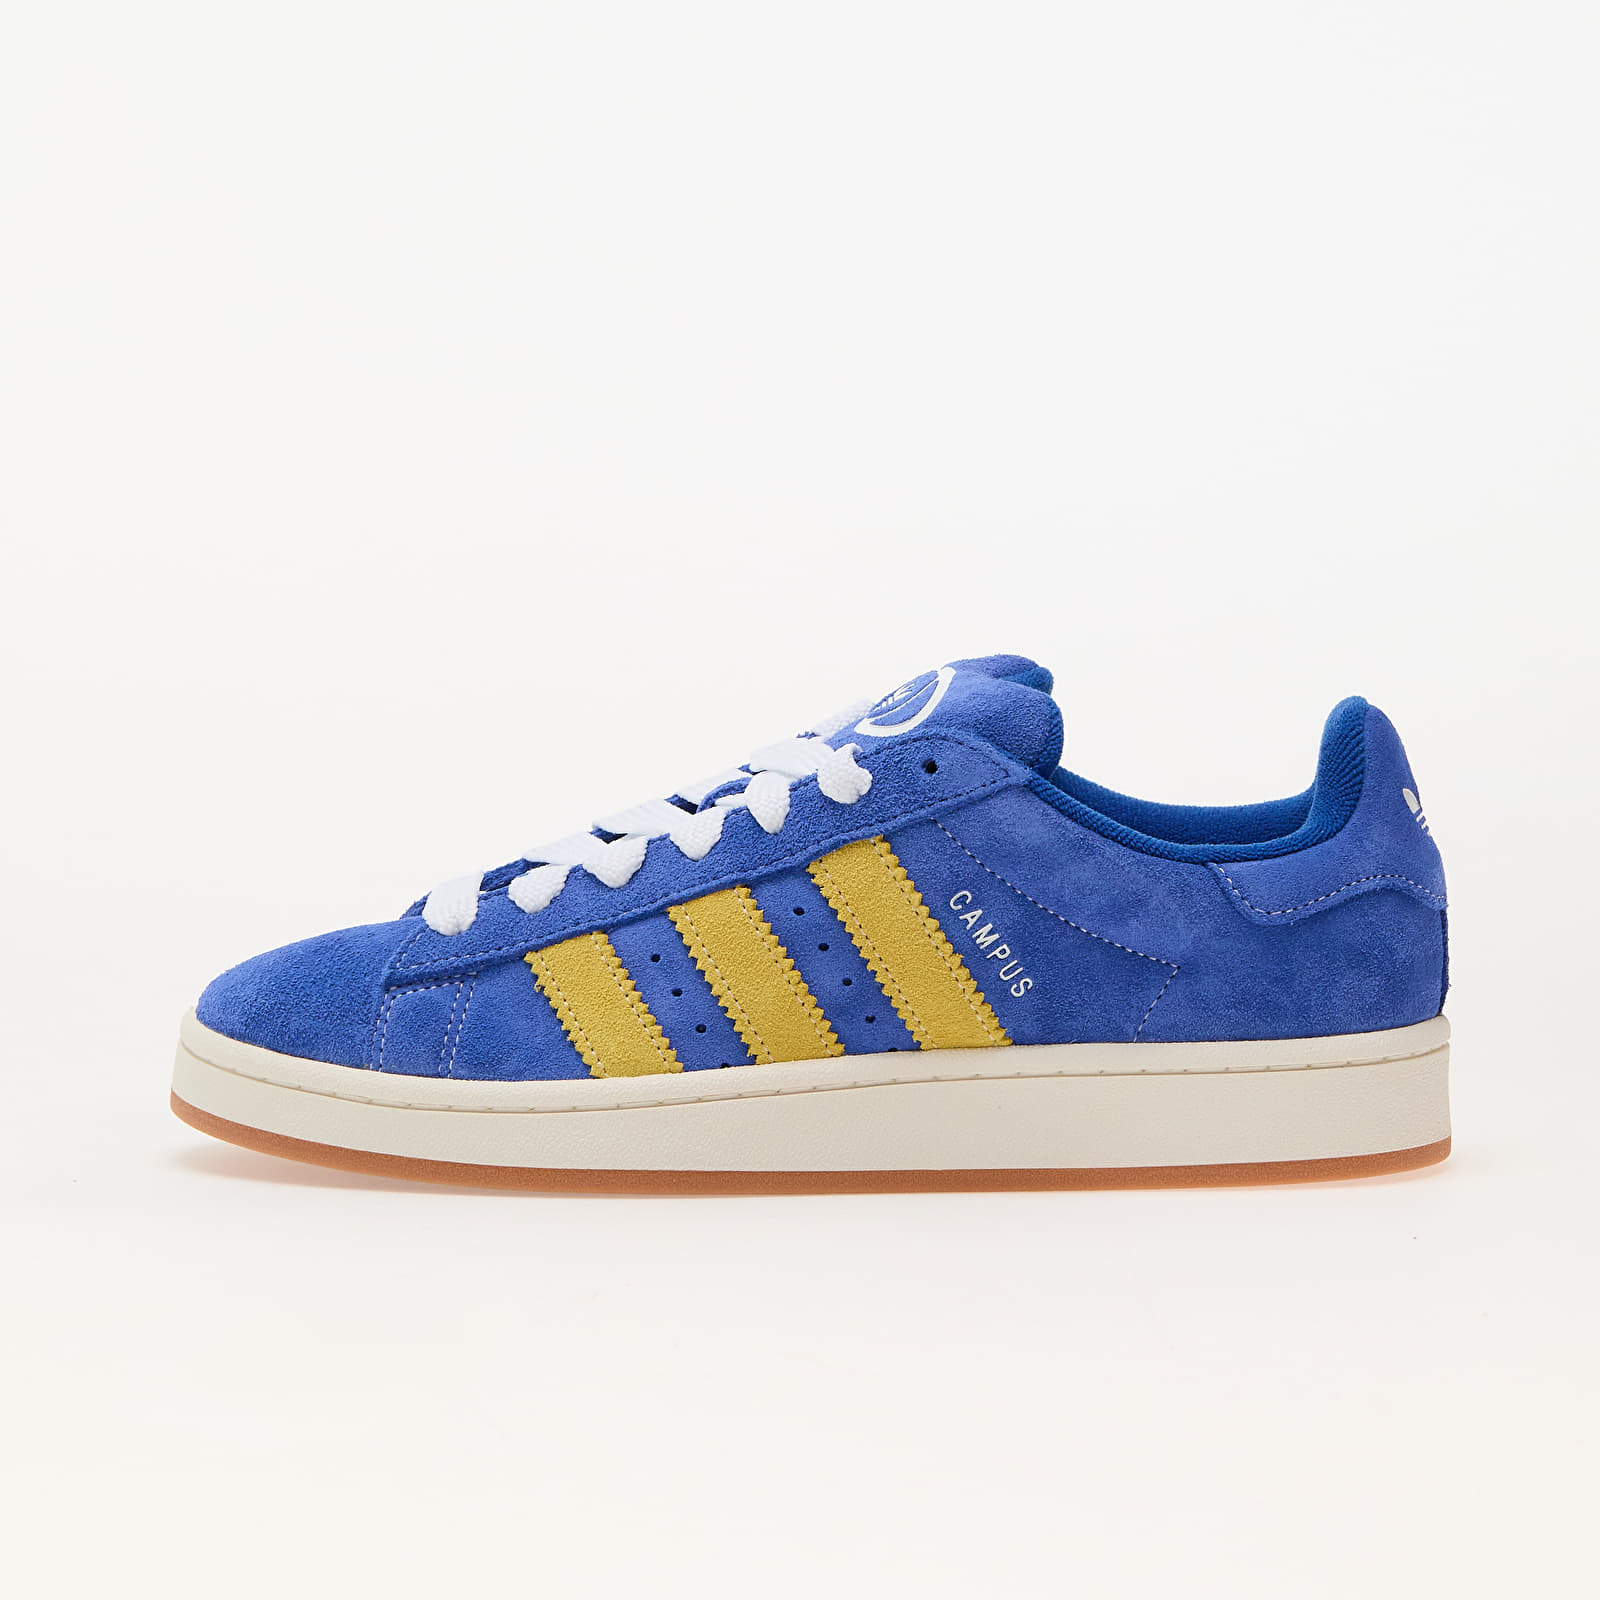 Chaussures et baskets homme adidas Campus 00s Royal Blue/ Solar Yellow/ Off White